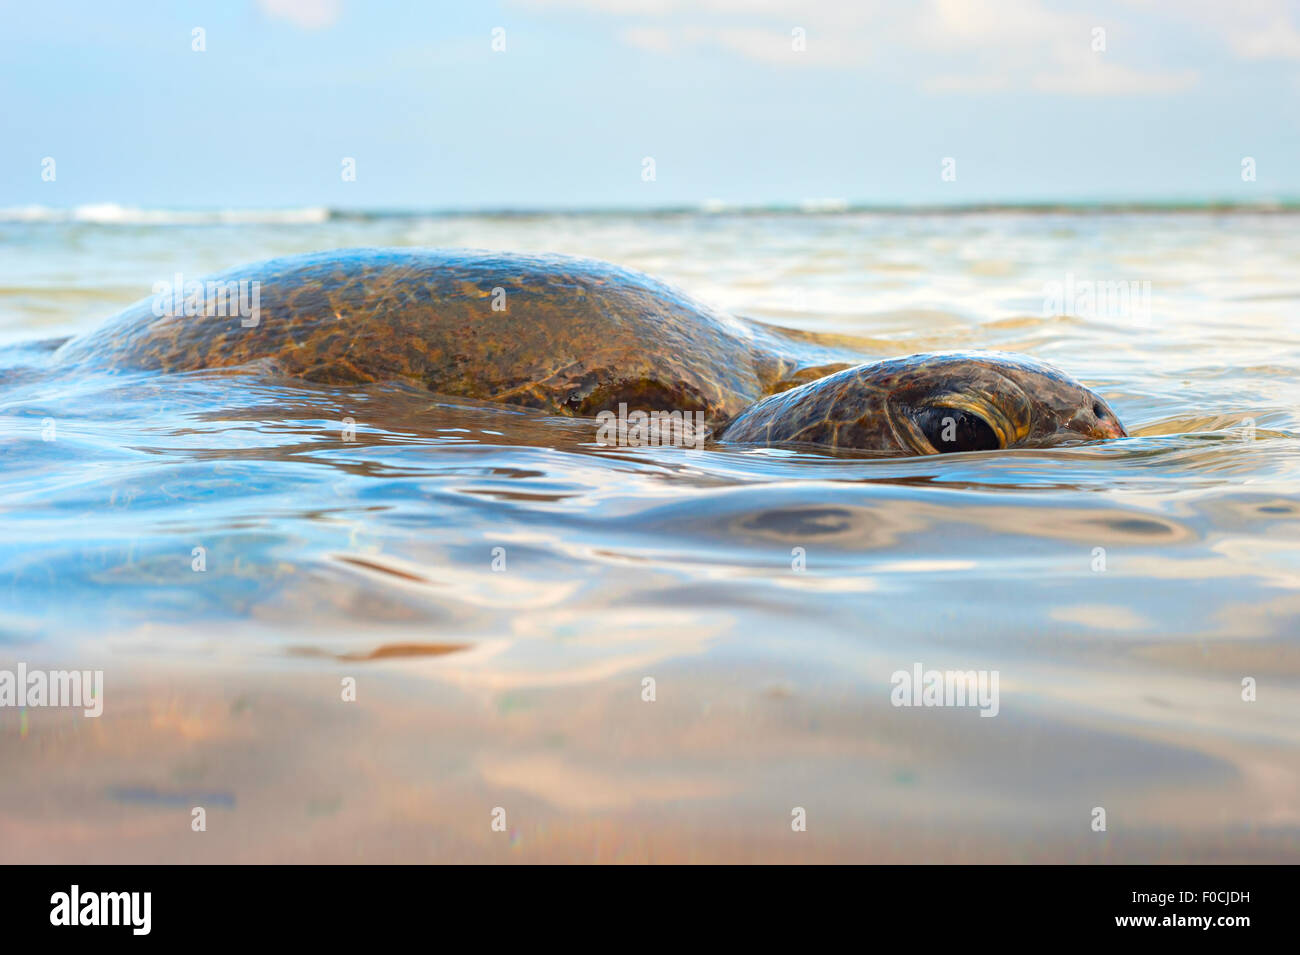 Close-up view of a turtle in the ocean. Sri Lanka Stock Photo